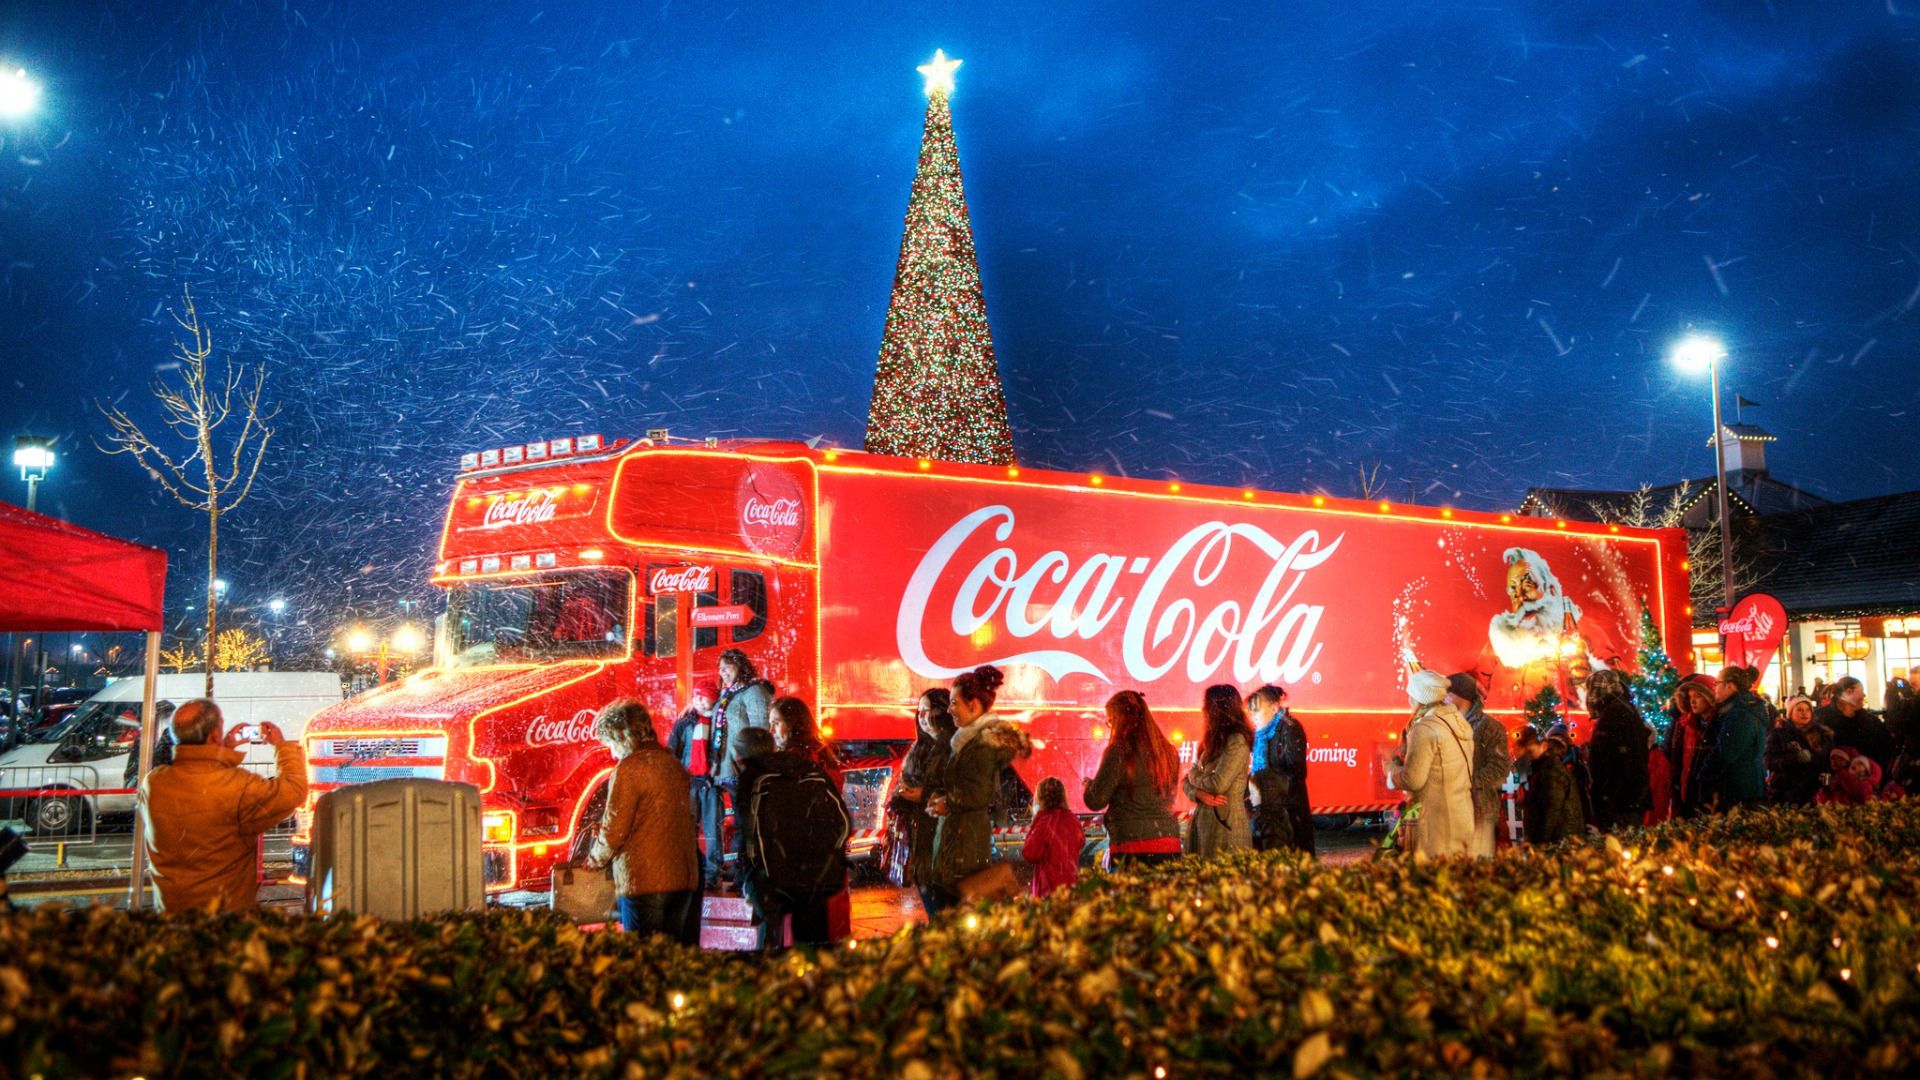 The Coca Cola Christmas Truck Isn't Welcome In One U.K. Town